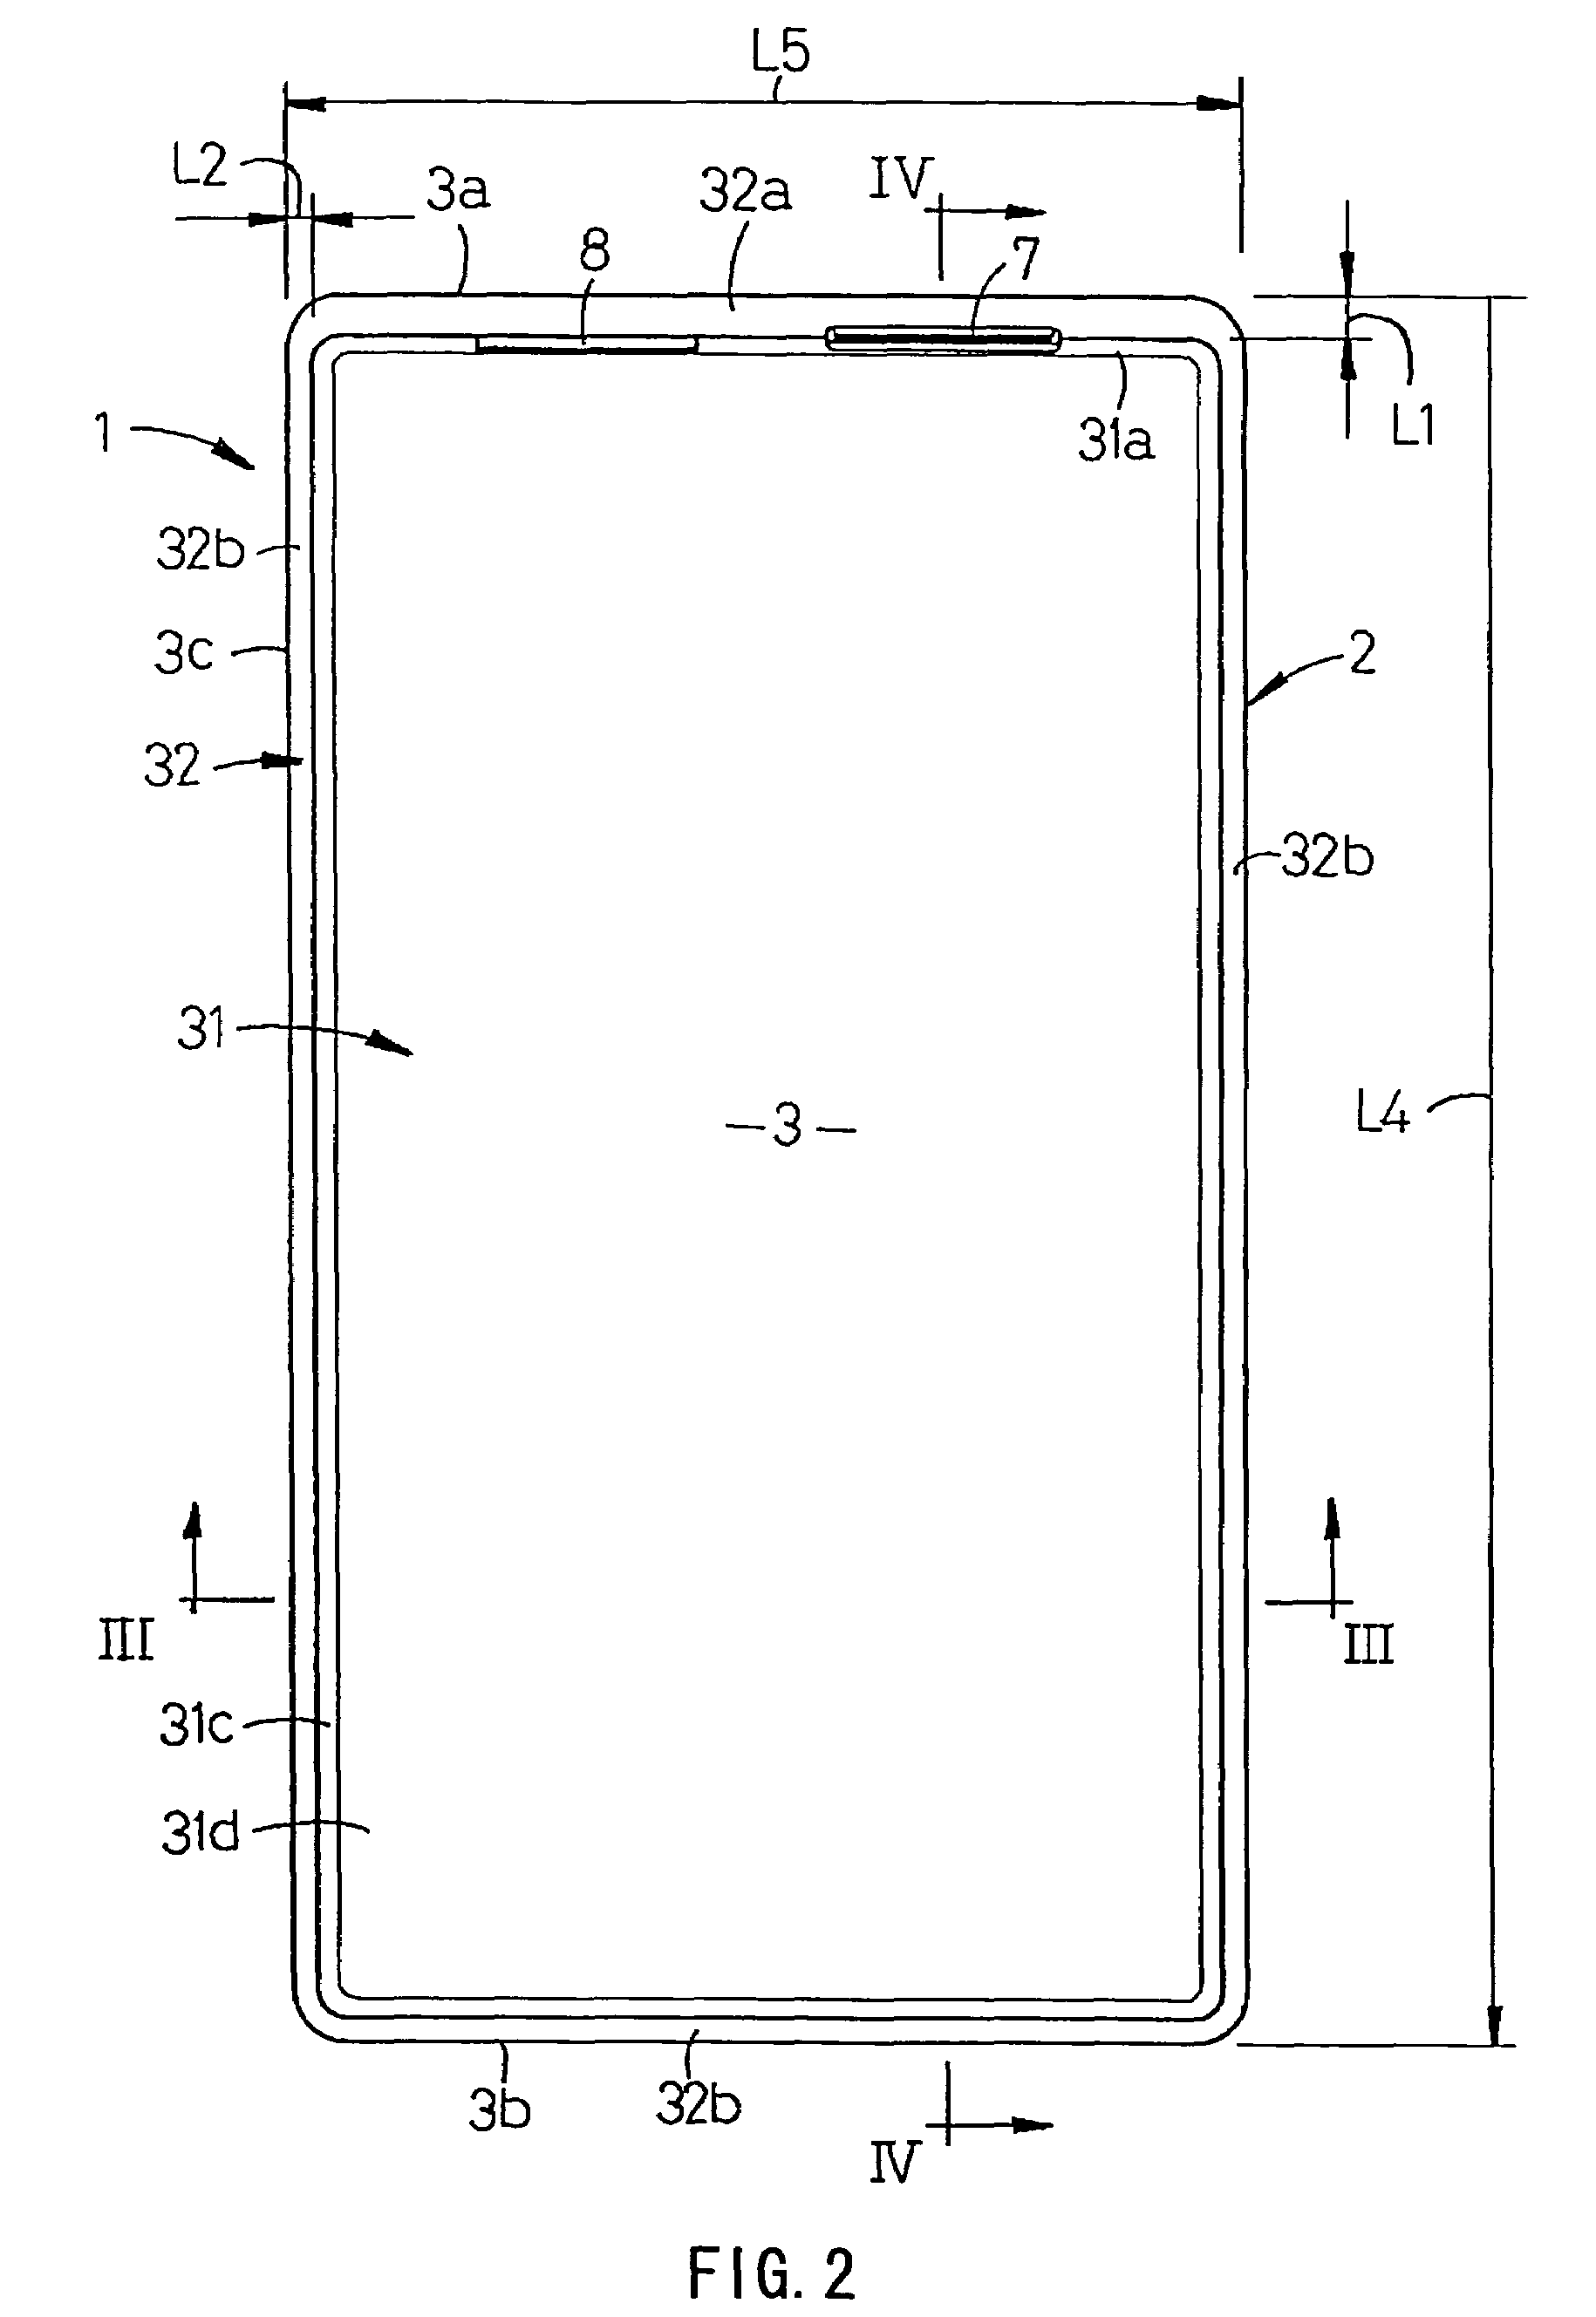 Battery comprising a flange formed at a peripheral edge and a protection circuit attached to the flange